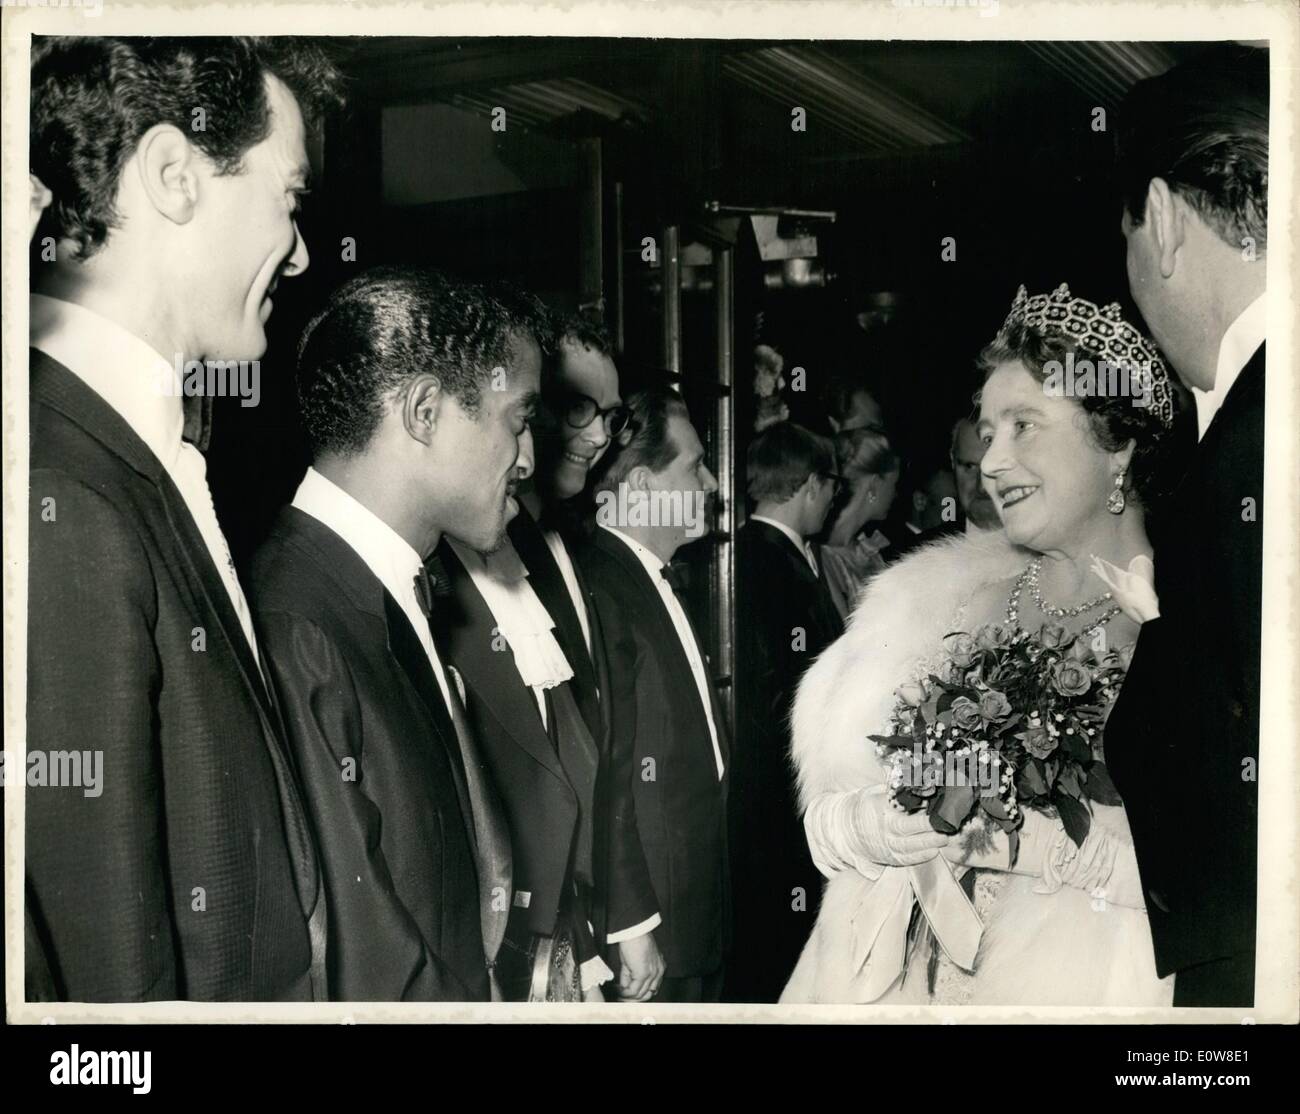 Nov. 11, 1961 - Royal Variety Show. Photo Shows: Following the Royal Variety Performance held at the Prince of Wales Theatre, London, last night, members of the Royal Family met a number of the stars backstage. H.R.H. The Queen Mother is seen chatting to the American star, Sammy Davis Jr. Stock Photo